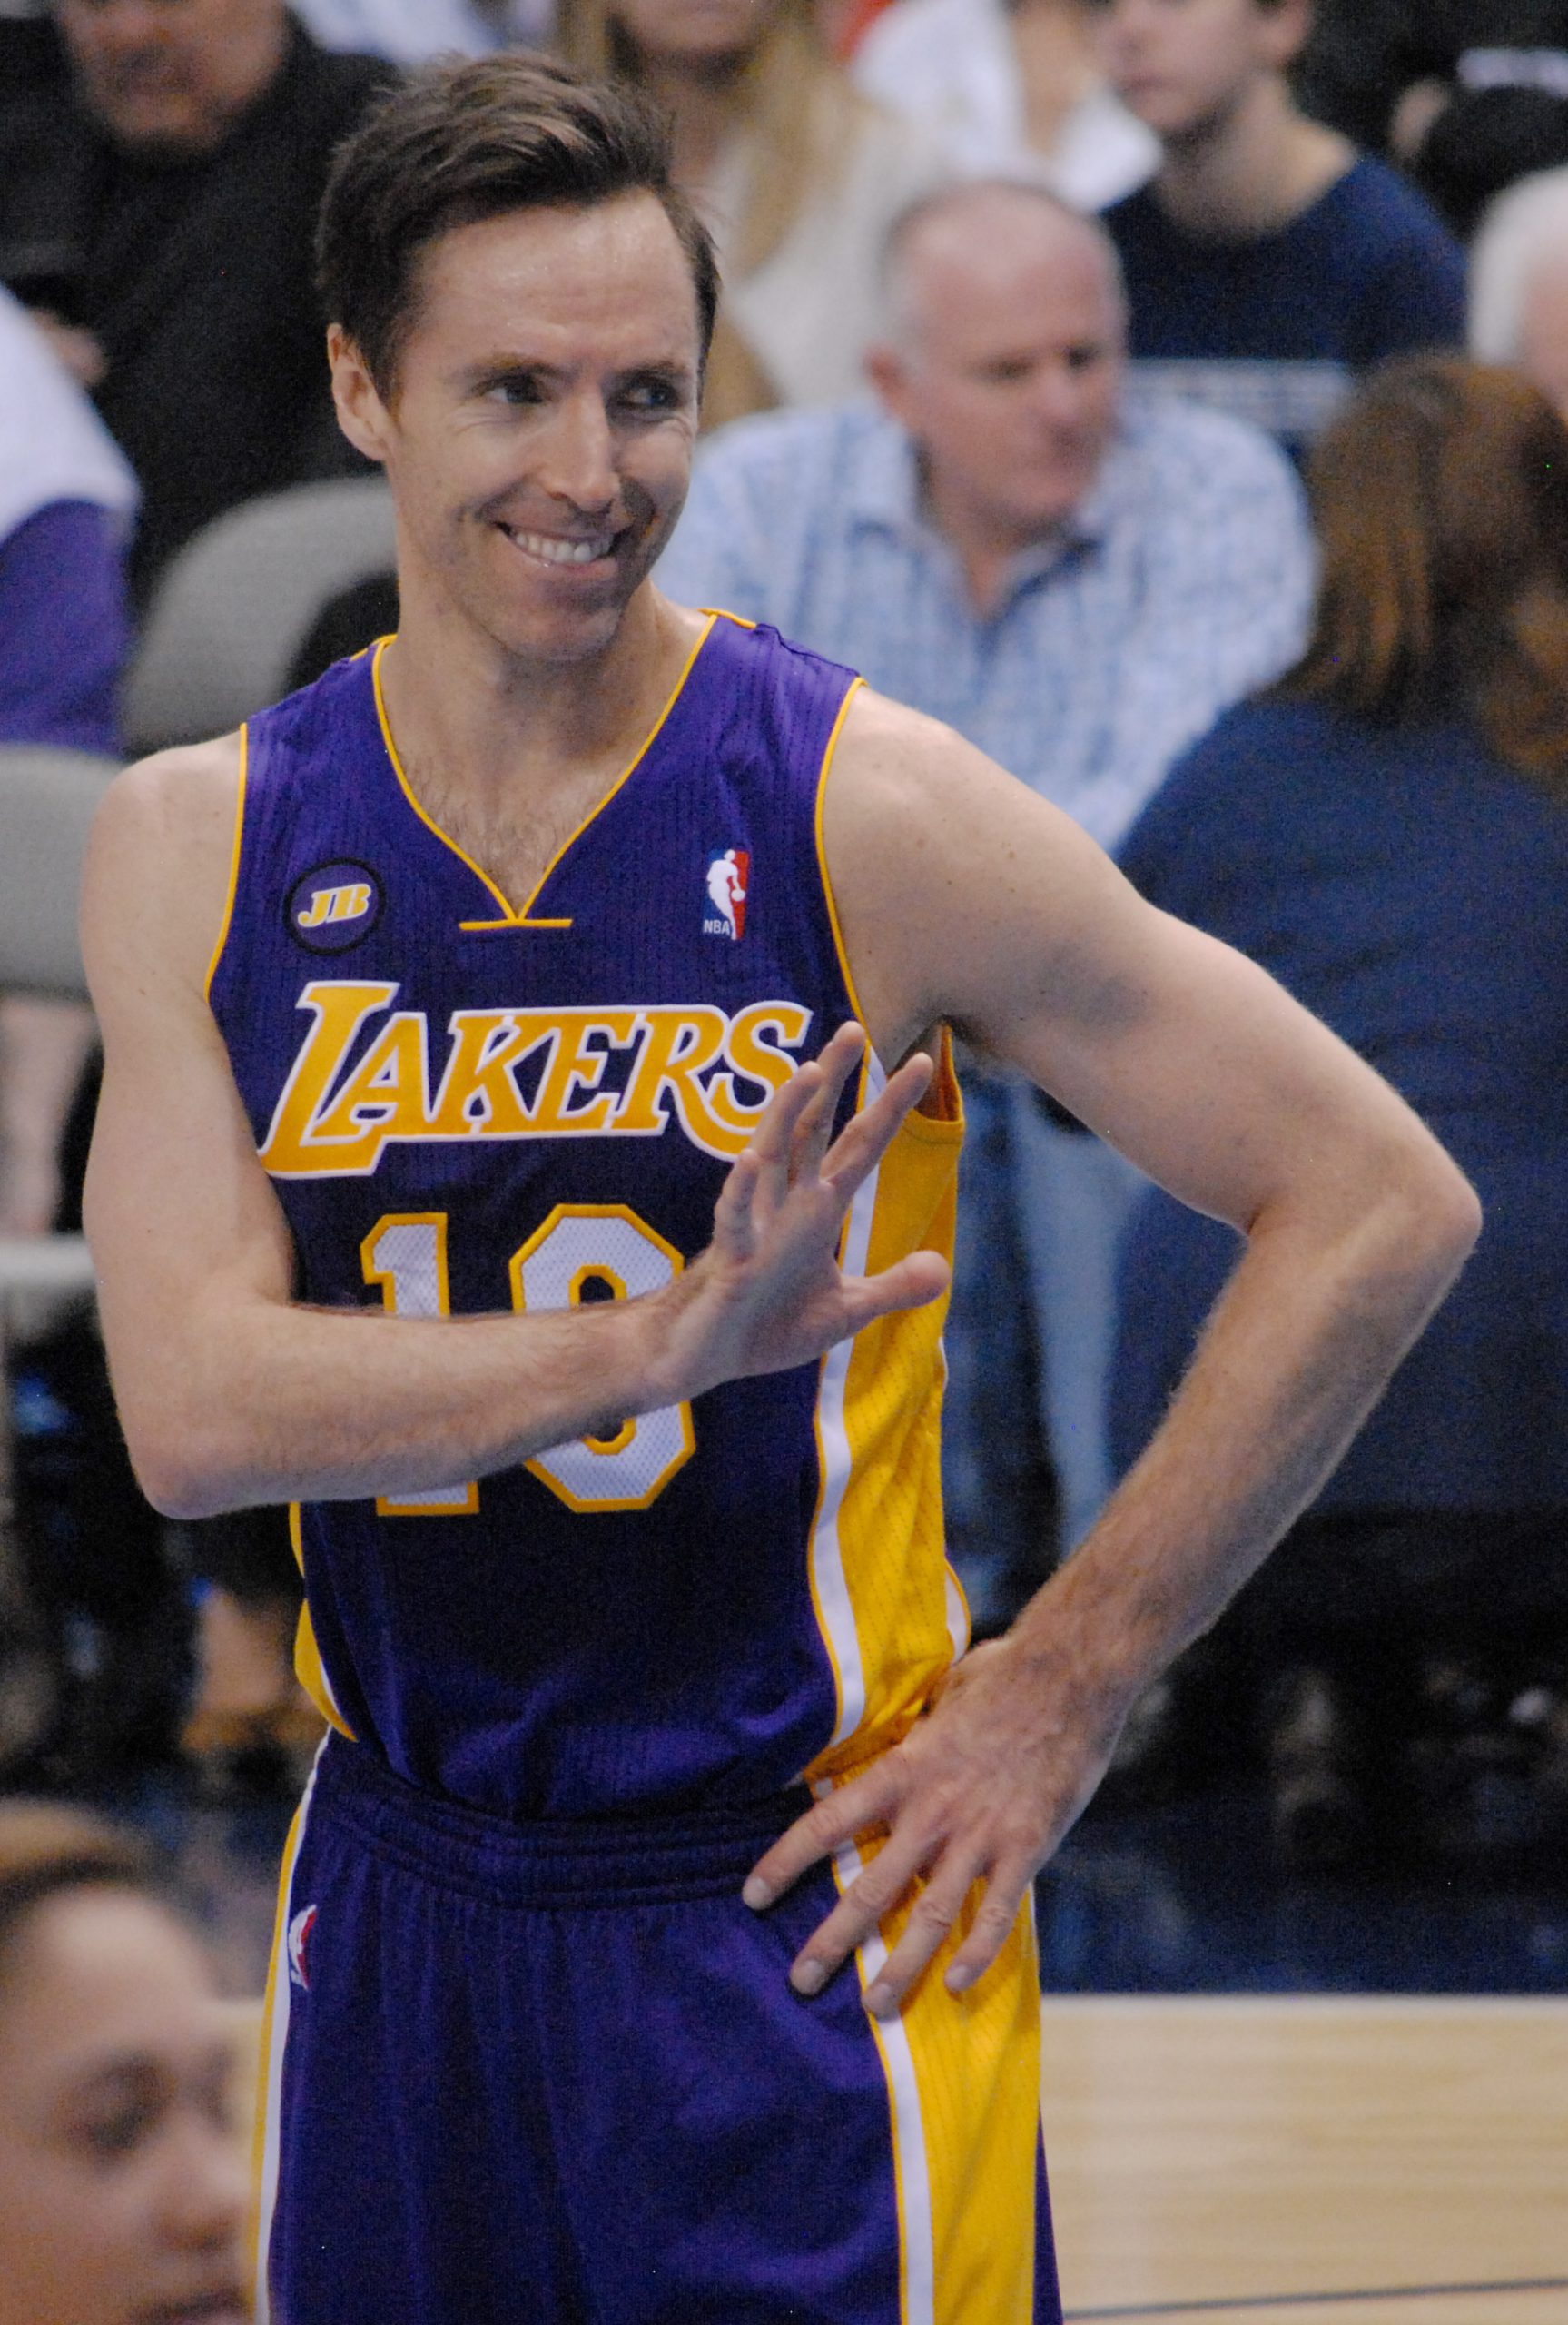 He was a badass': Stories from Steve Nash's college career at